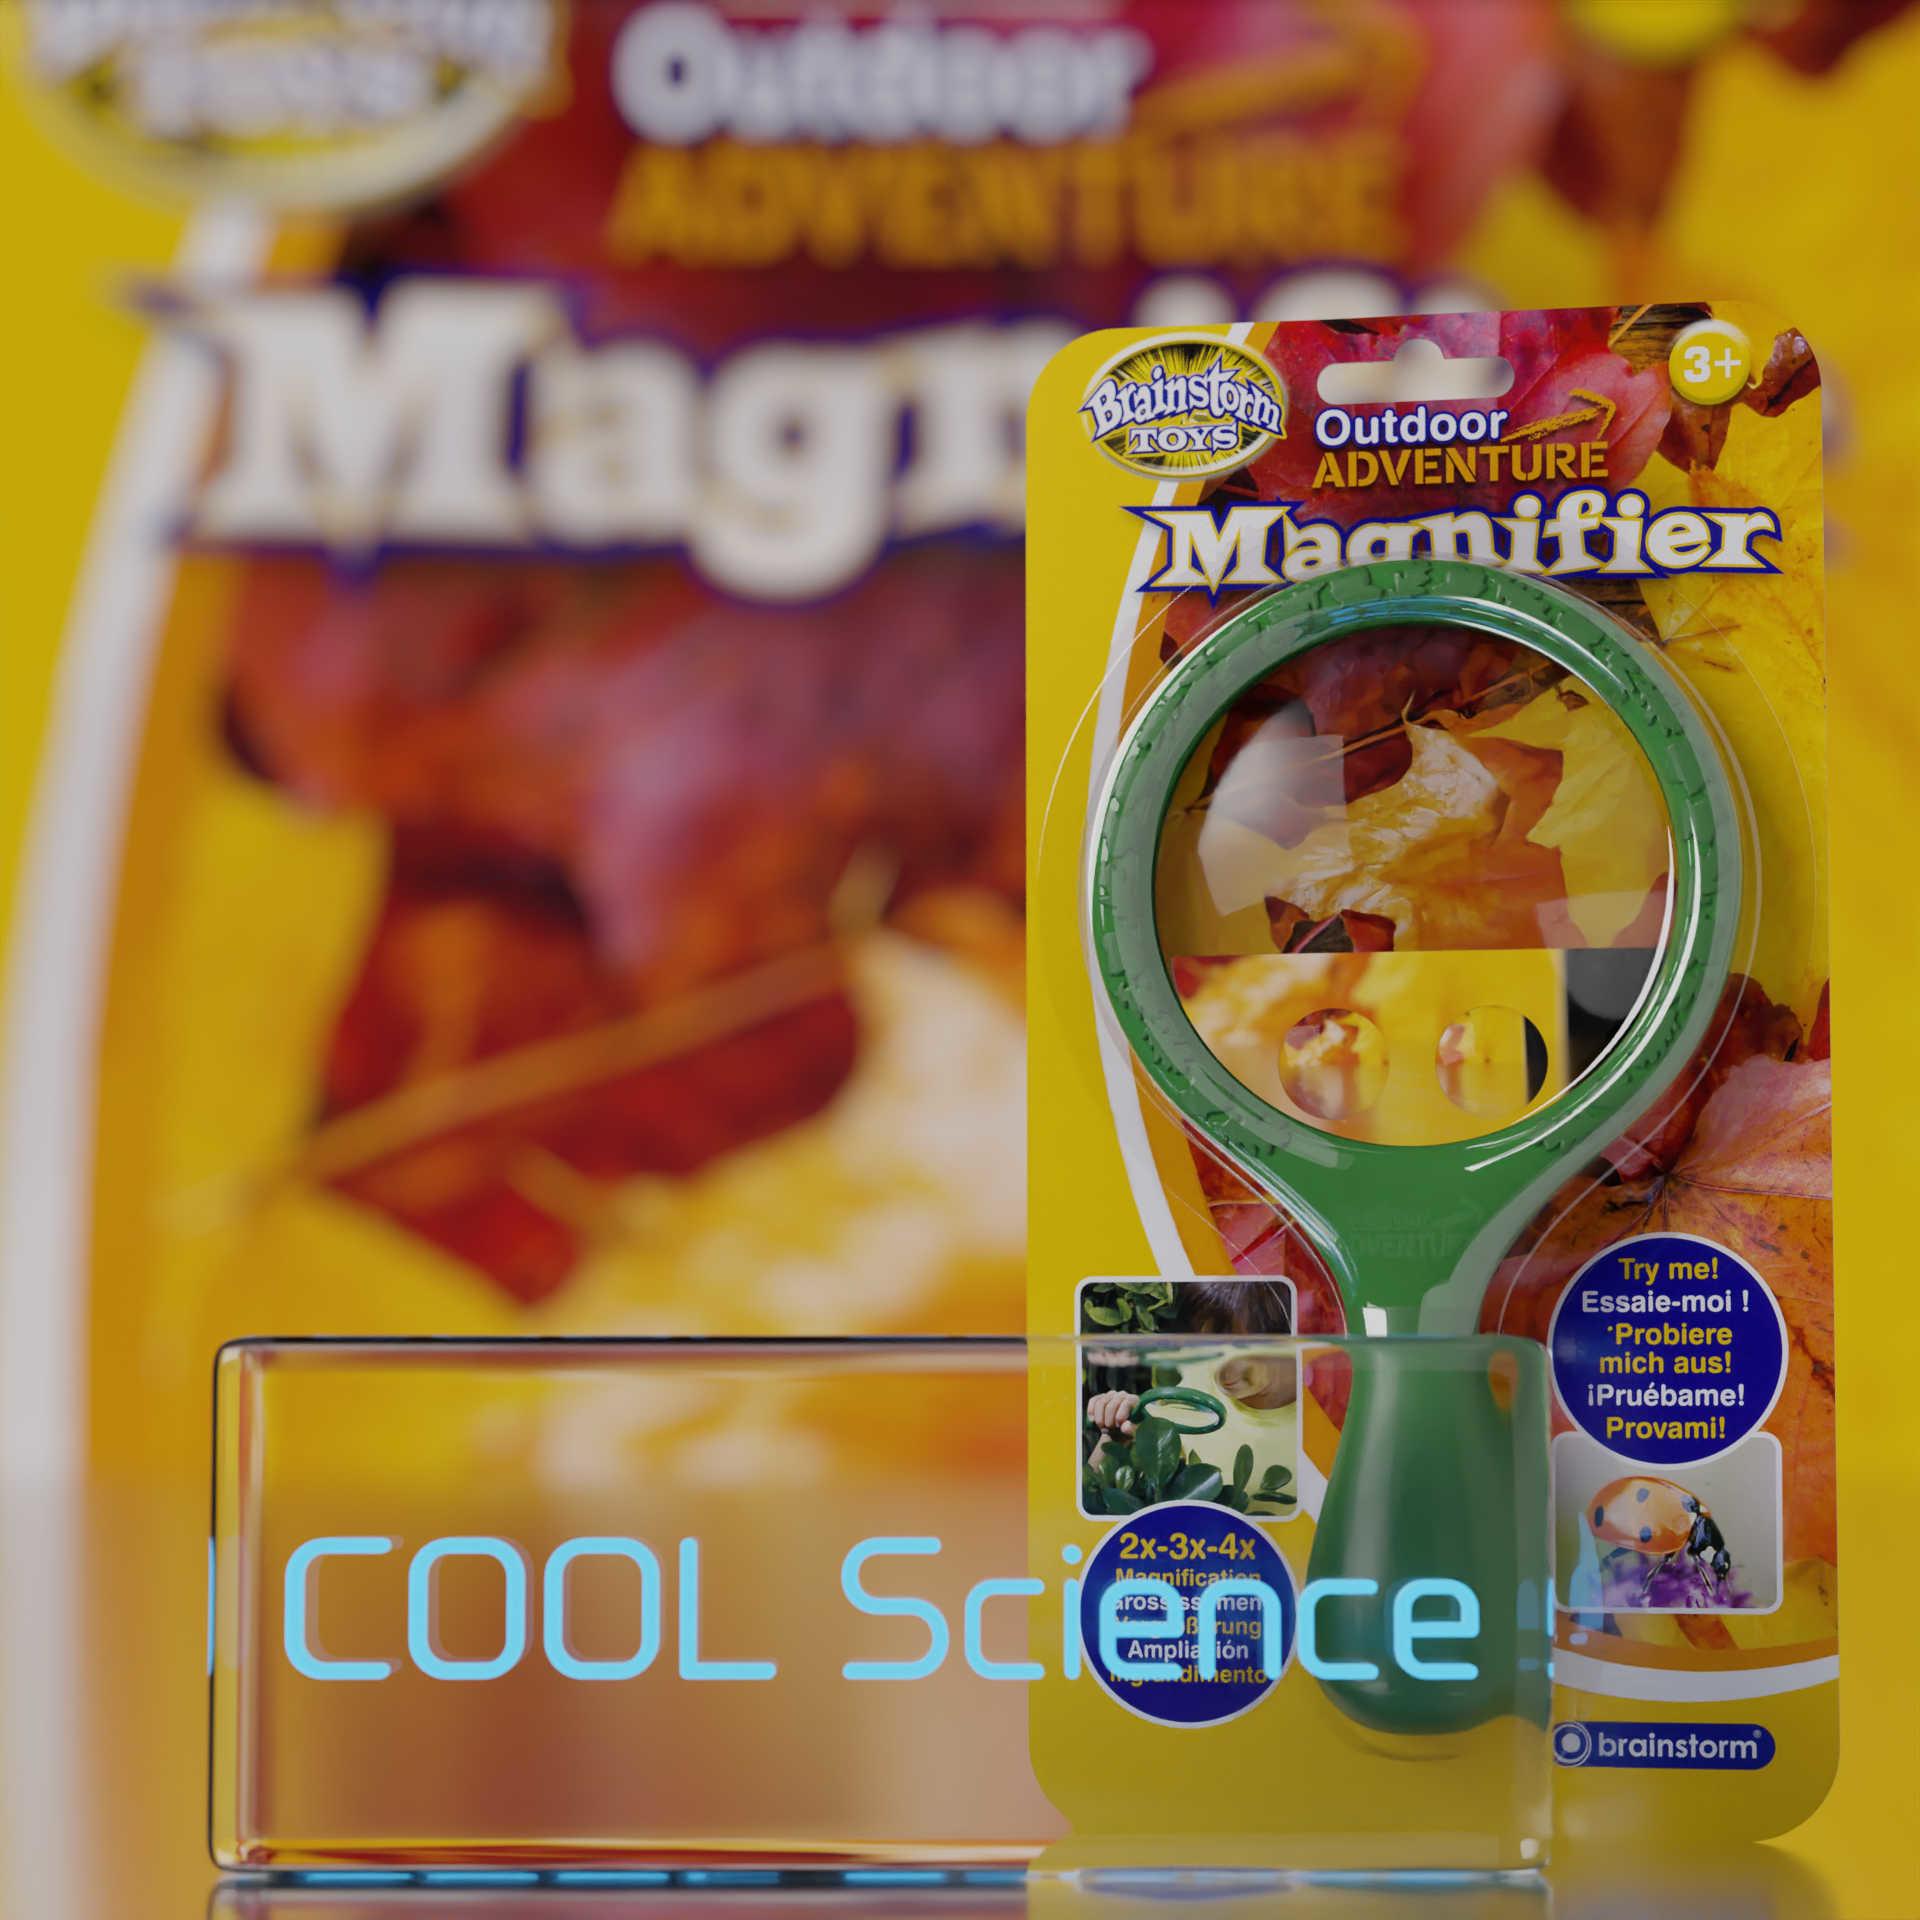 Front View of the Brainstorm Outdoor Adventure Magnifier on it’s backing card